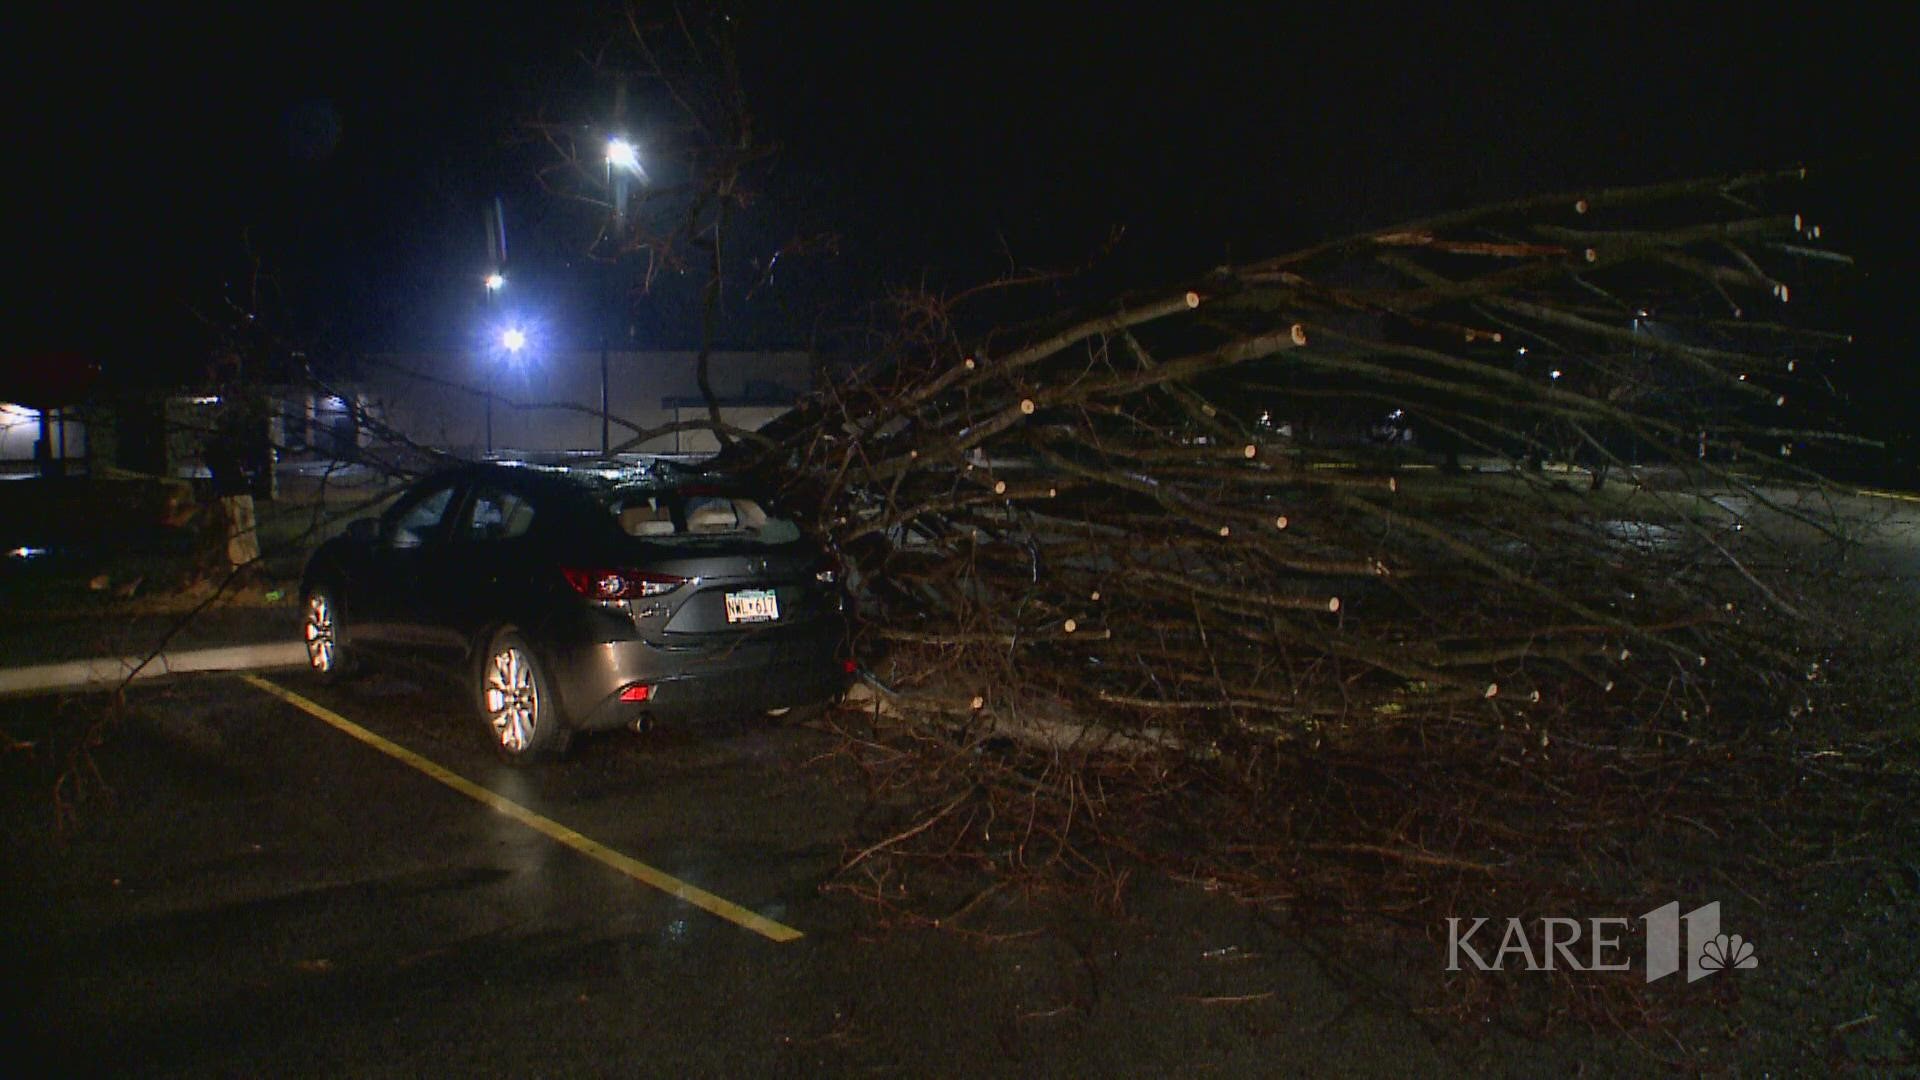 KARE 11 crews captured some of the storm damage left behind in Faribault, Minnesota after severe storms pushed through the area Tuesday night.